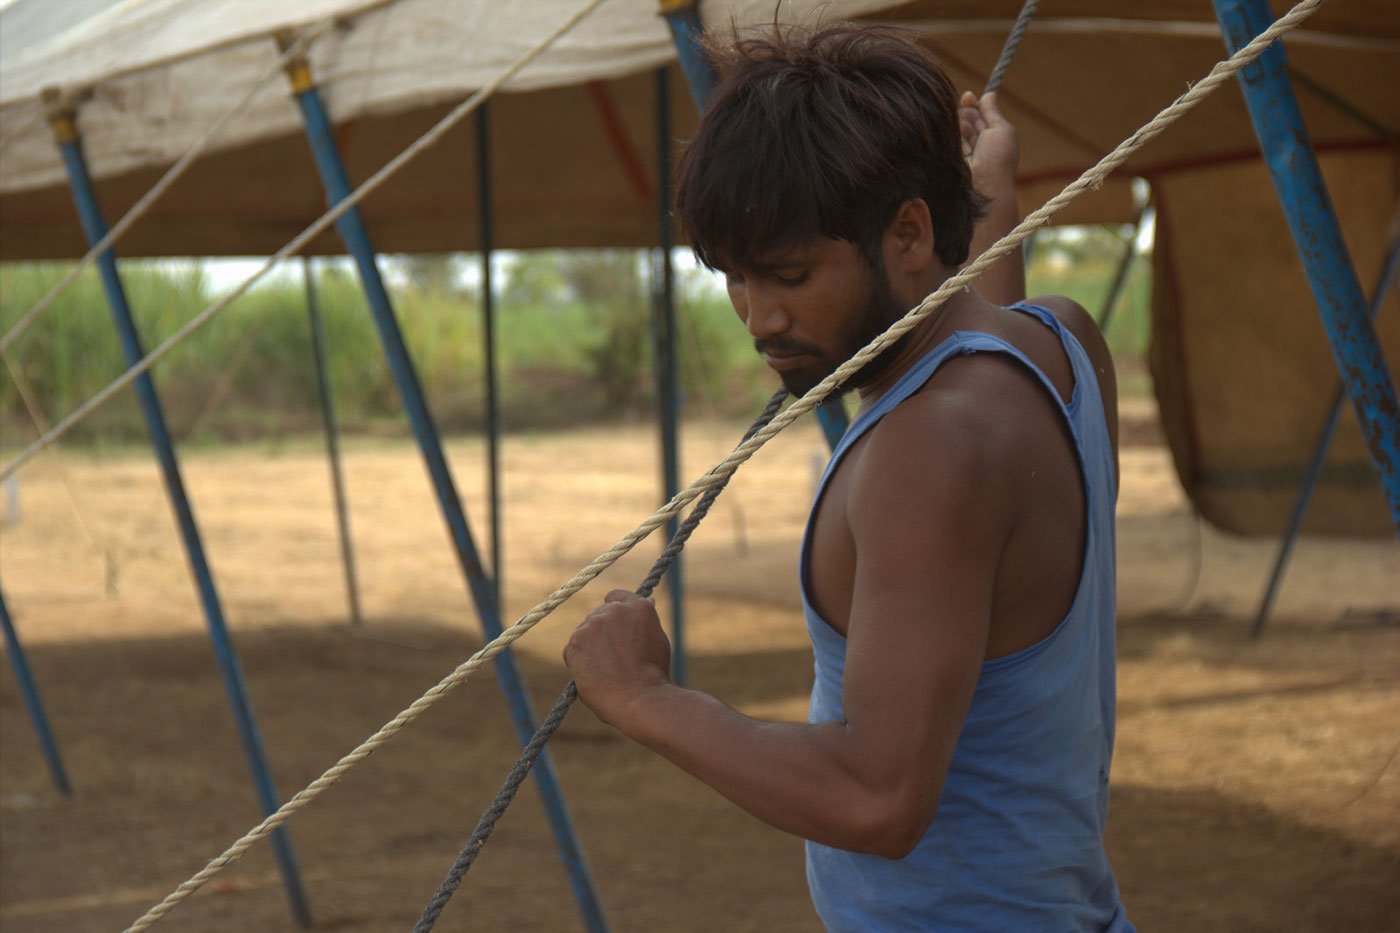 Lallan Paswan from Aumau village, Lucknow district, UP works on the tents on 4 May 2018 in Karavadi village, Satara district, in western Maharashtra